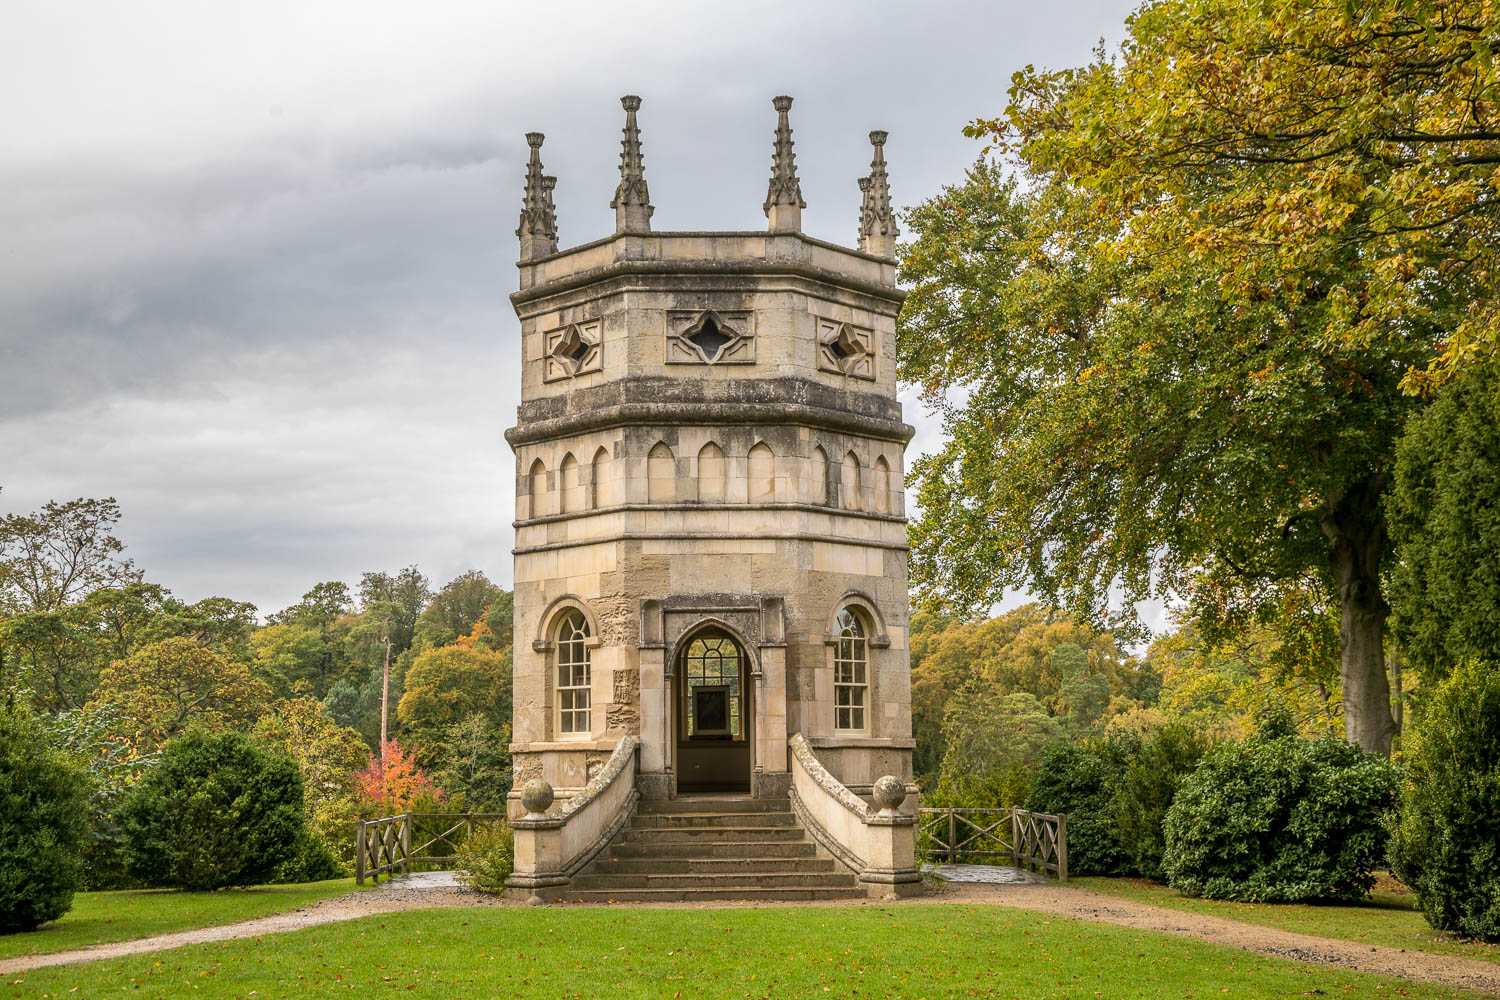 Octagonal Tower, Studley Royal